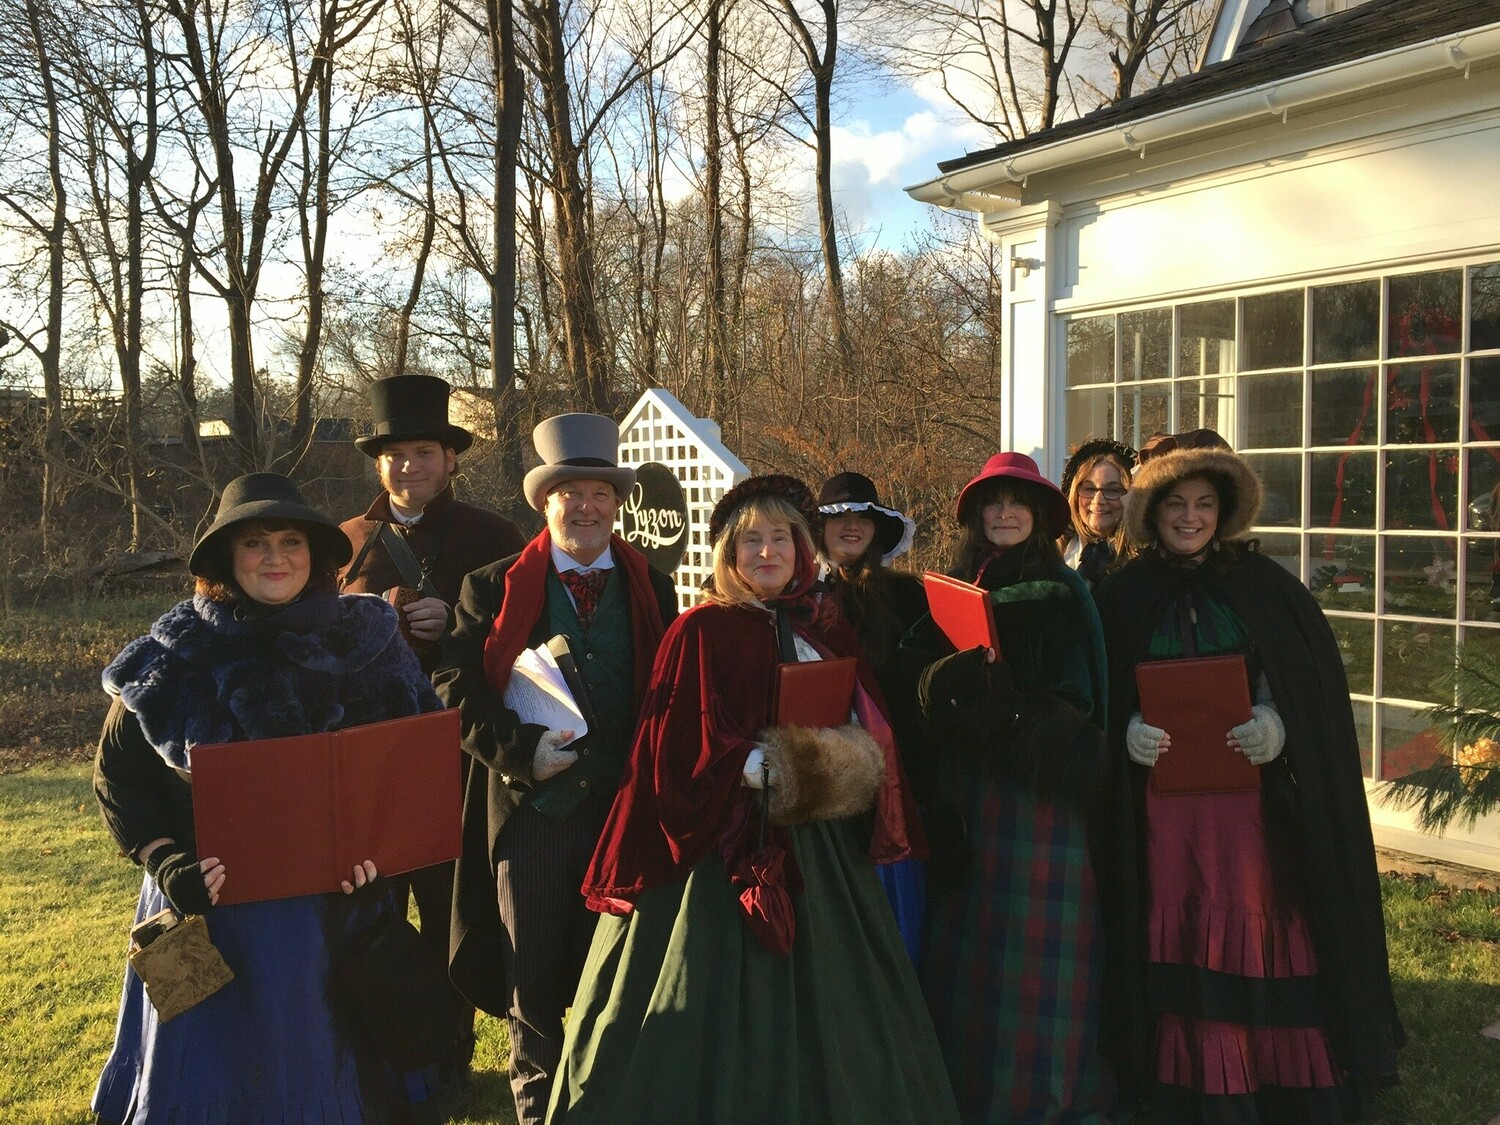 The Dickens Carolers will perform in a candlelight walk from the Sag Harbor Historical Society's Annie Cooper Boyd House to Long Wharf in Sag Harbor on December 2.